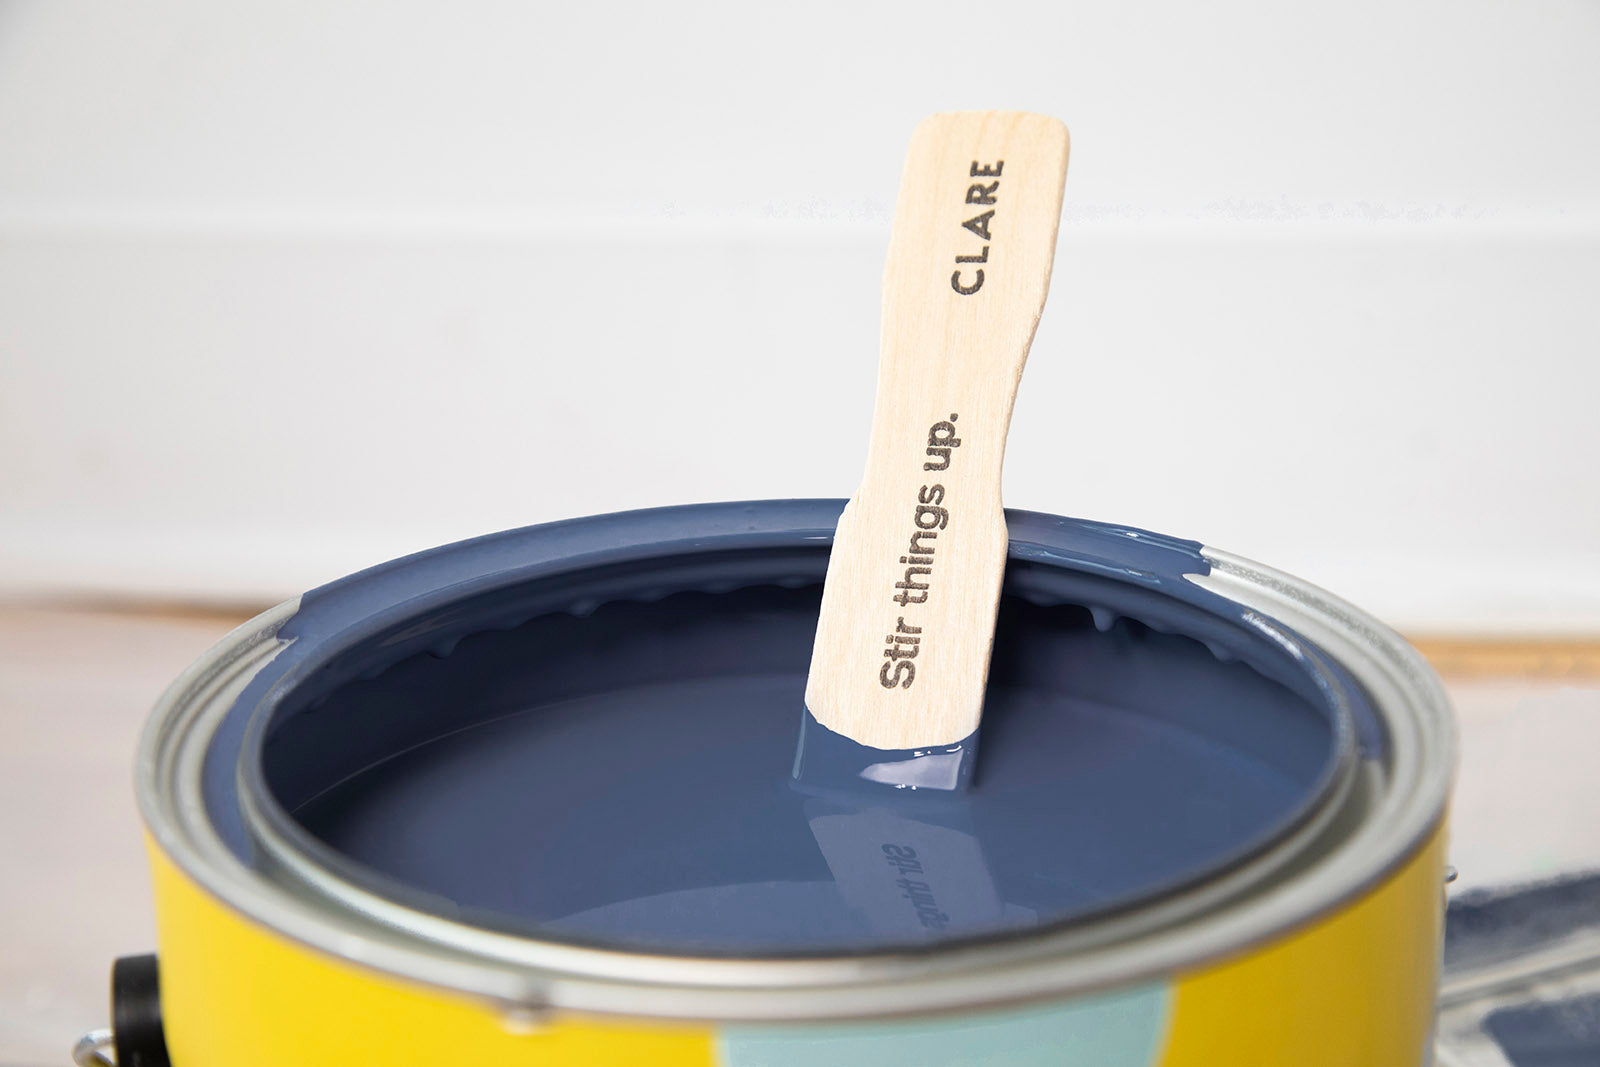 Everything you need to know about paint coverage, including how much a gallon of paint covers, and how to calculate exactly how much paint you need.